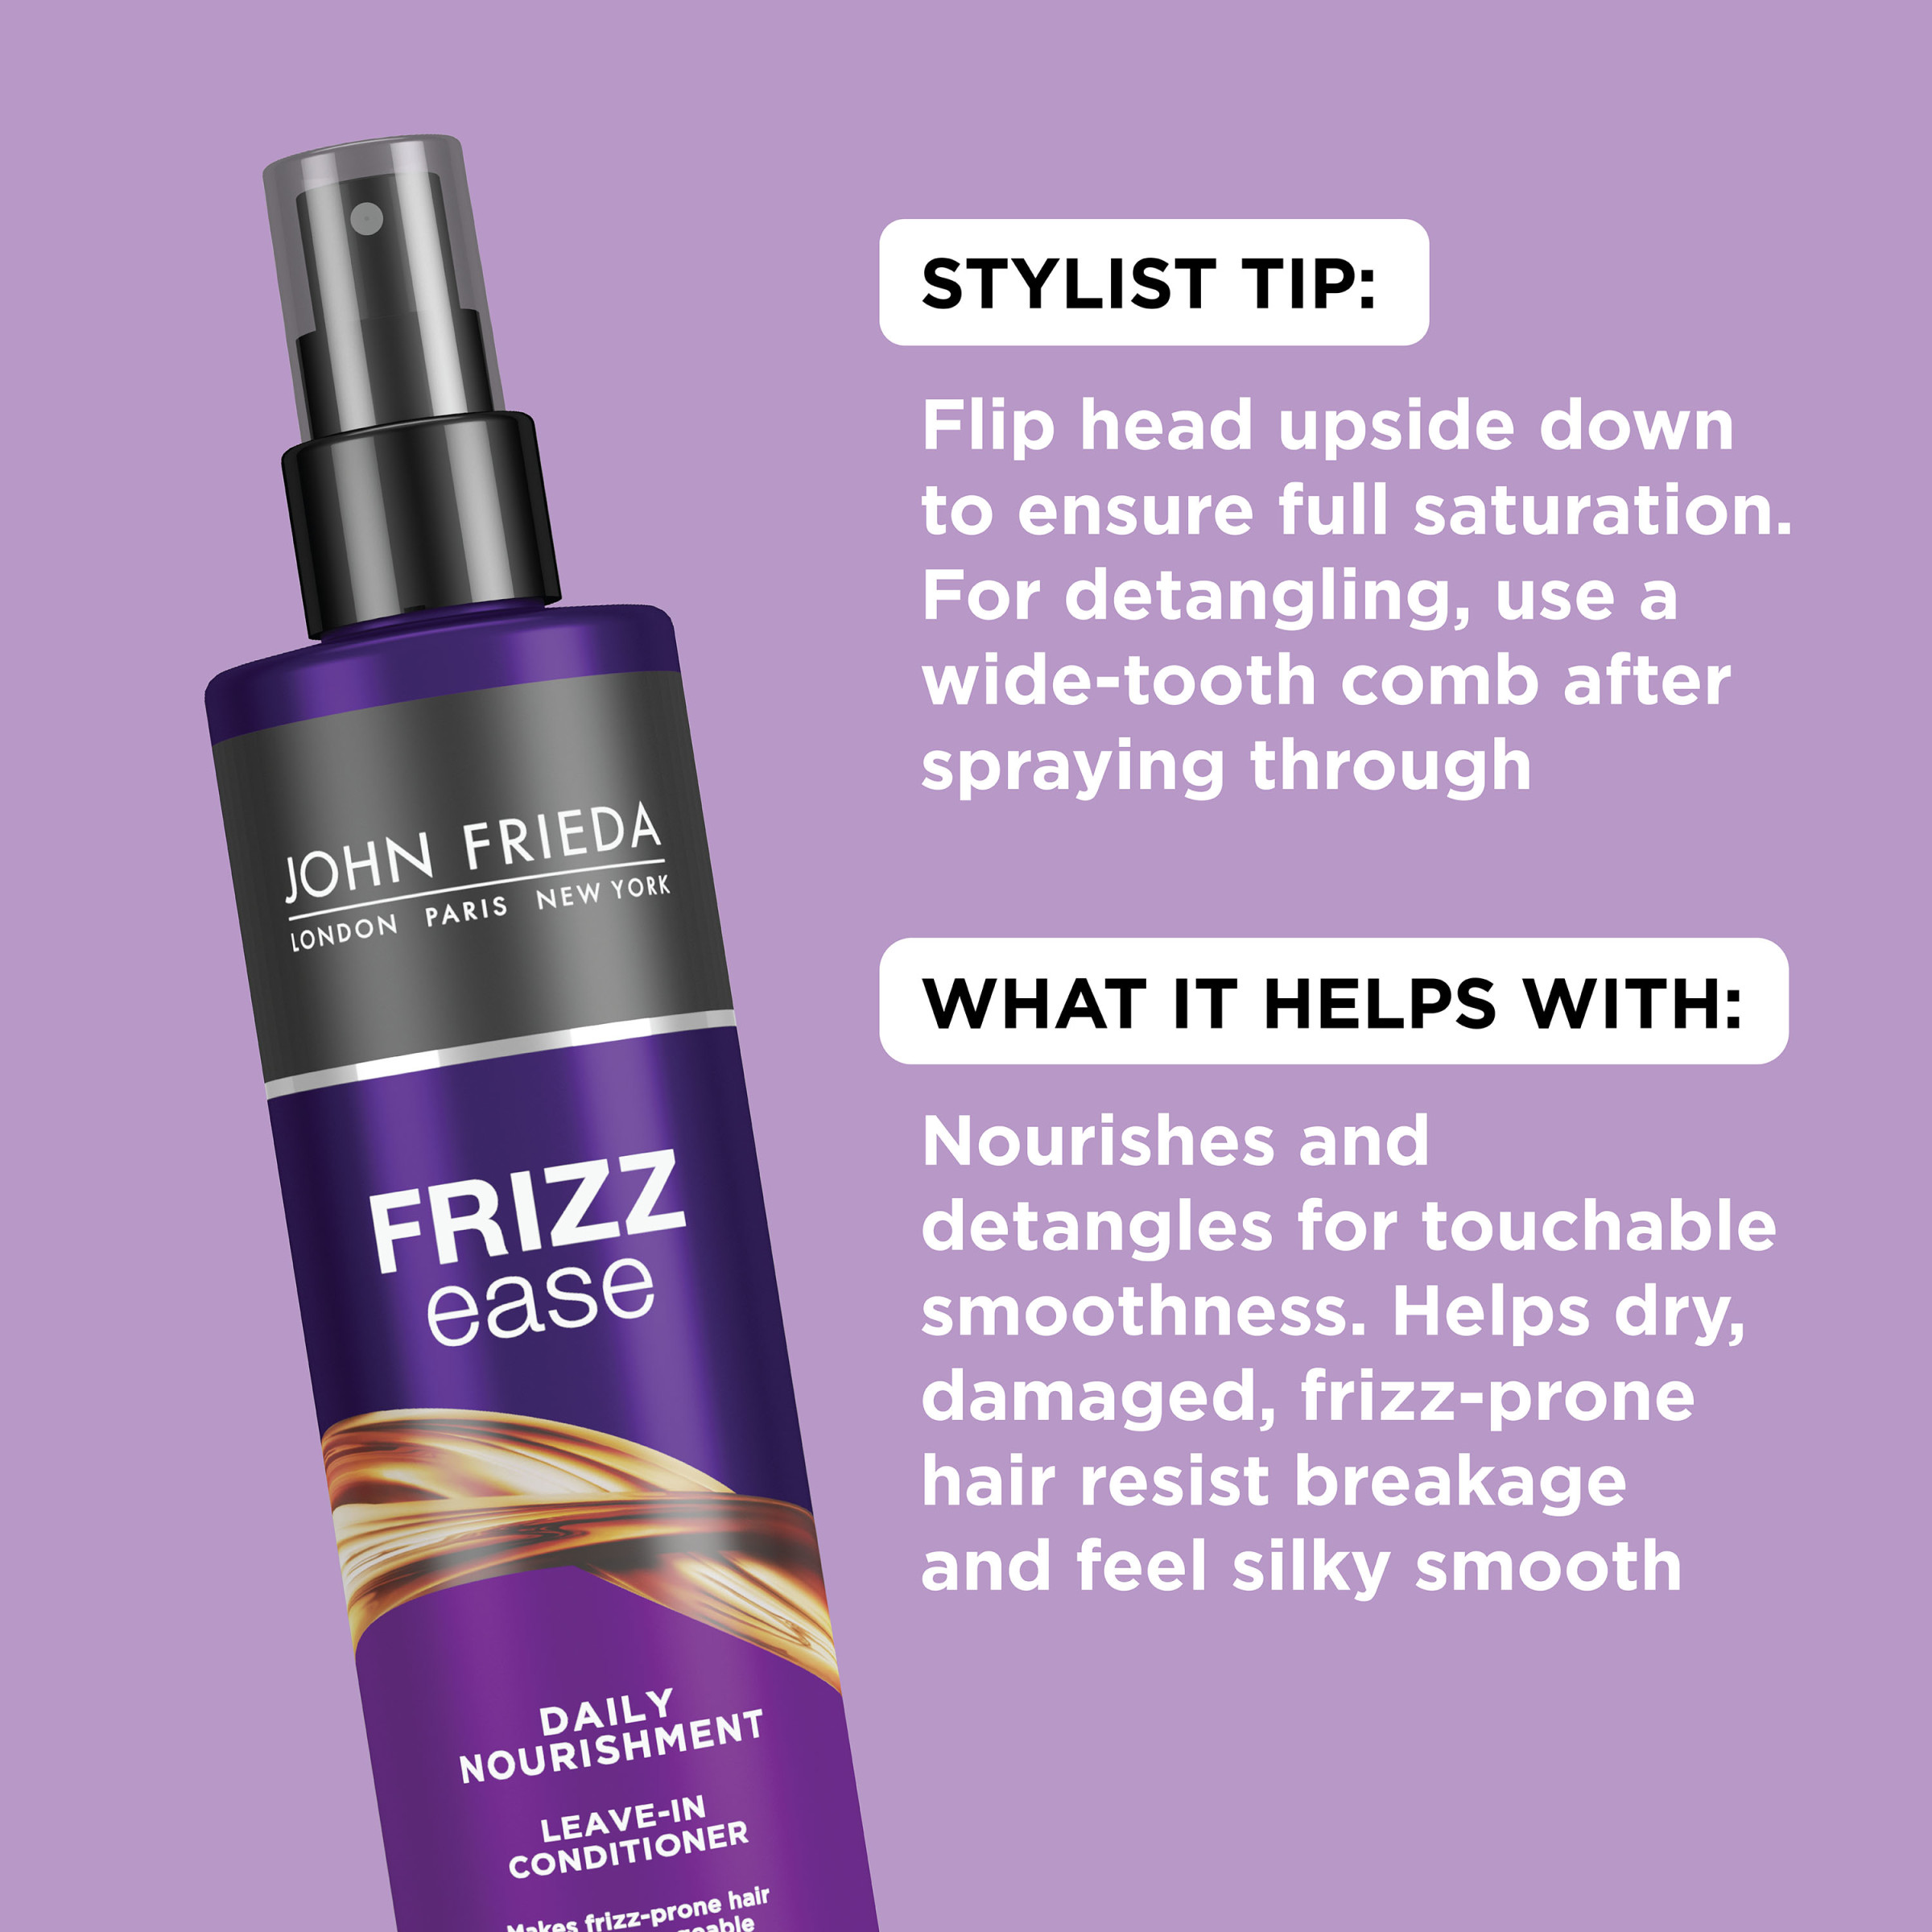 John Frieda Anti Frizz, Frizz Ease Daily Nourishment Leave In Conditioner for Frizzy, Dry Hair, 8 fl oz - image 3 of 10